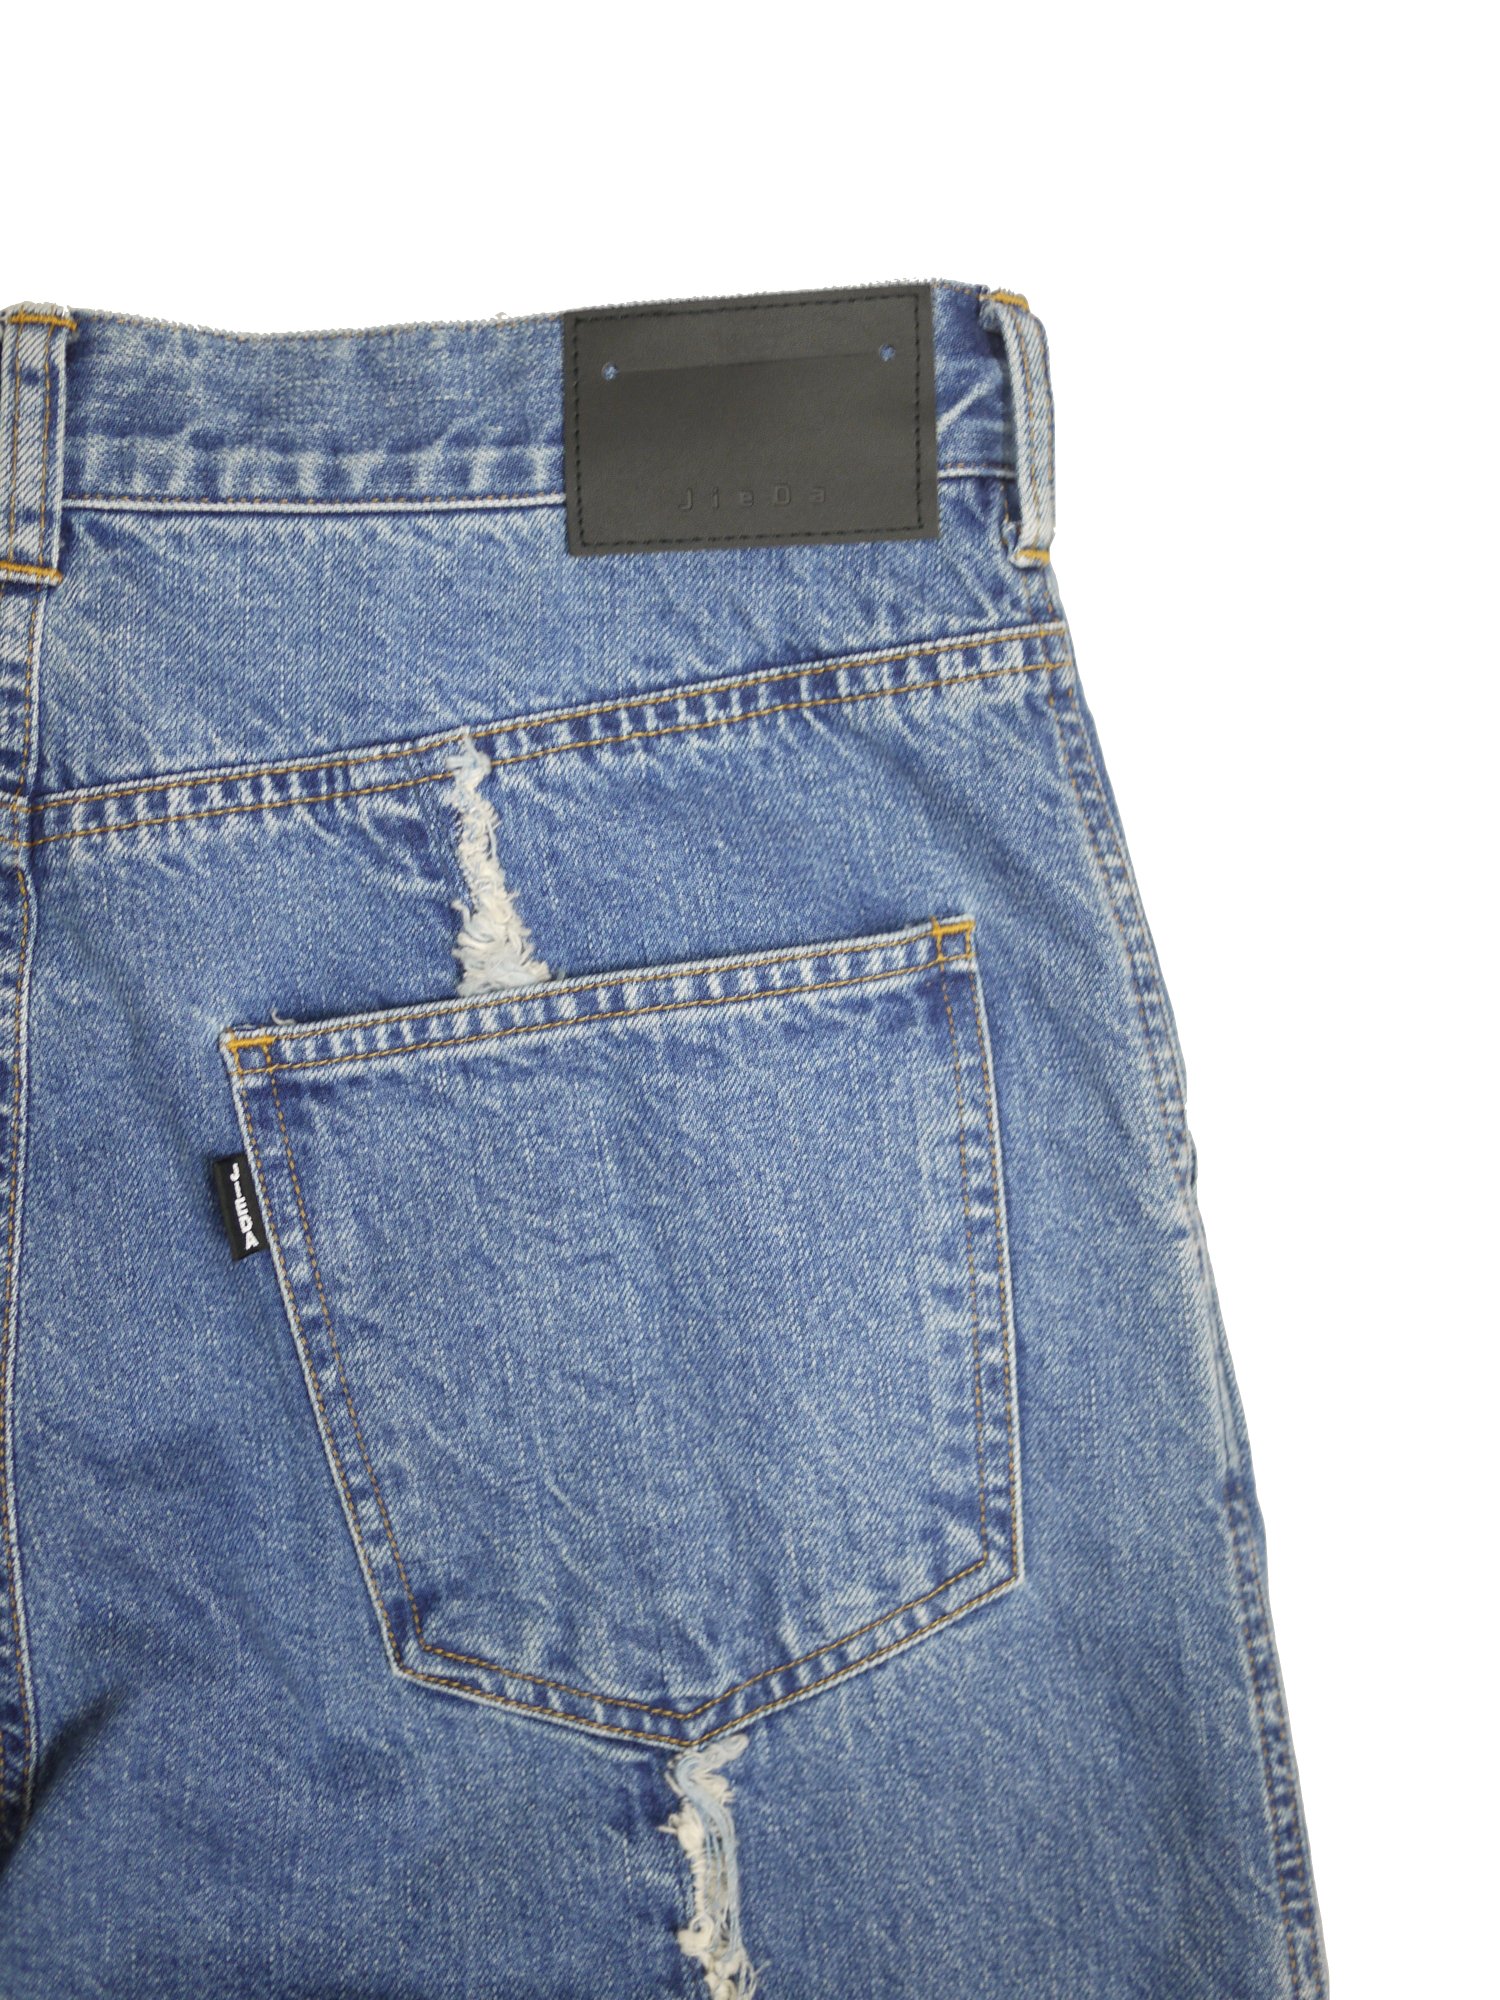 JieDa<br />SWITCHING OVER DENIM PANTS / INDIGO<img class='new_mark_img2' src='https://img.shop-pro.jp/img/new/icons47.gif' style='border:none;display:inline;margin:0px;padding:0px;width:auto;' />